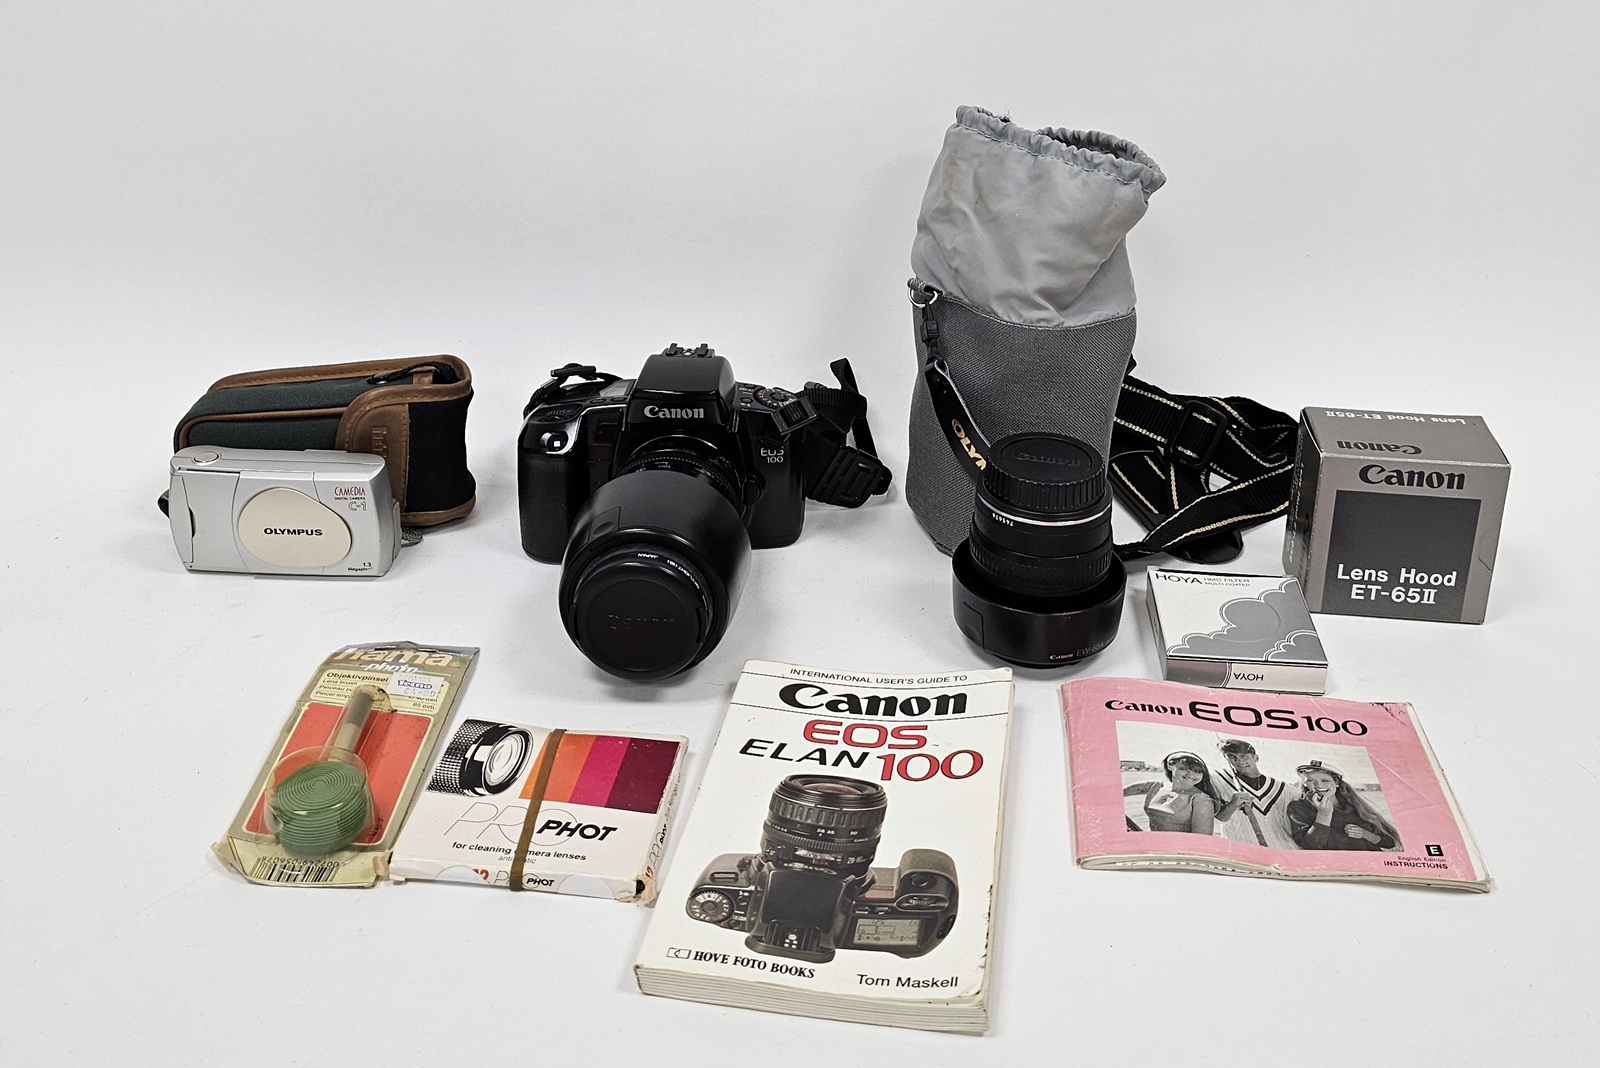 Canon EOS100 camera with Canon zoom lens and other camera equipment - Image 2 of 3